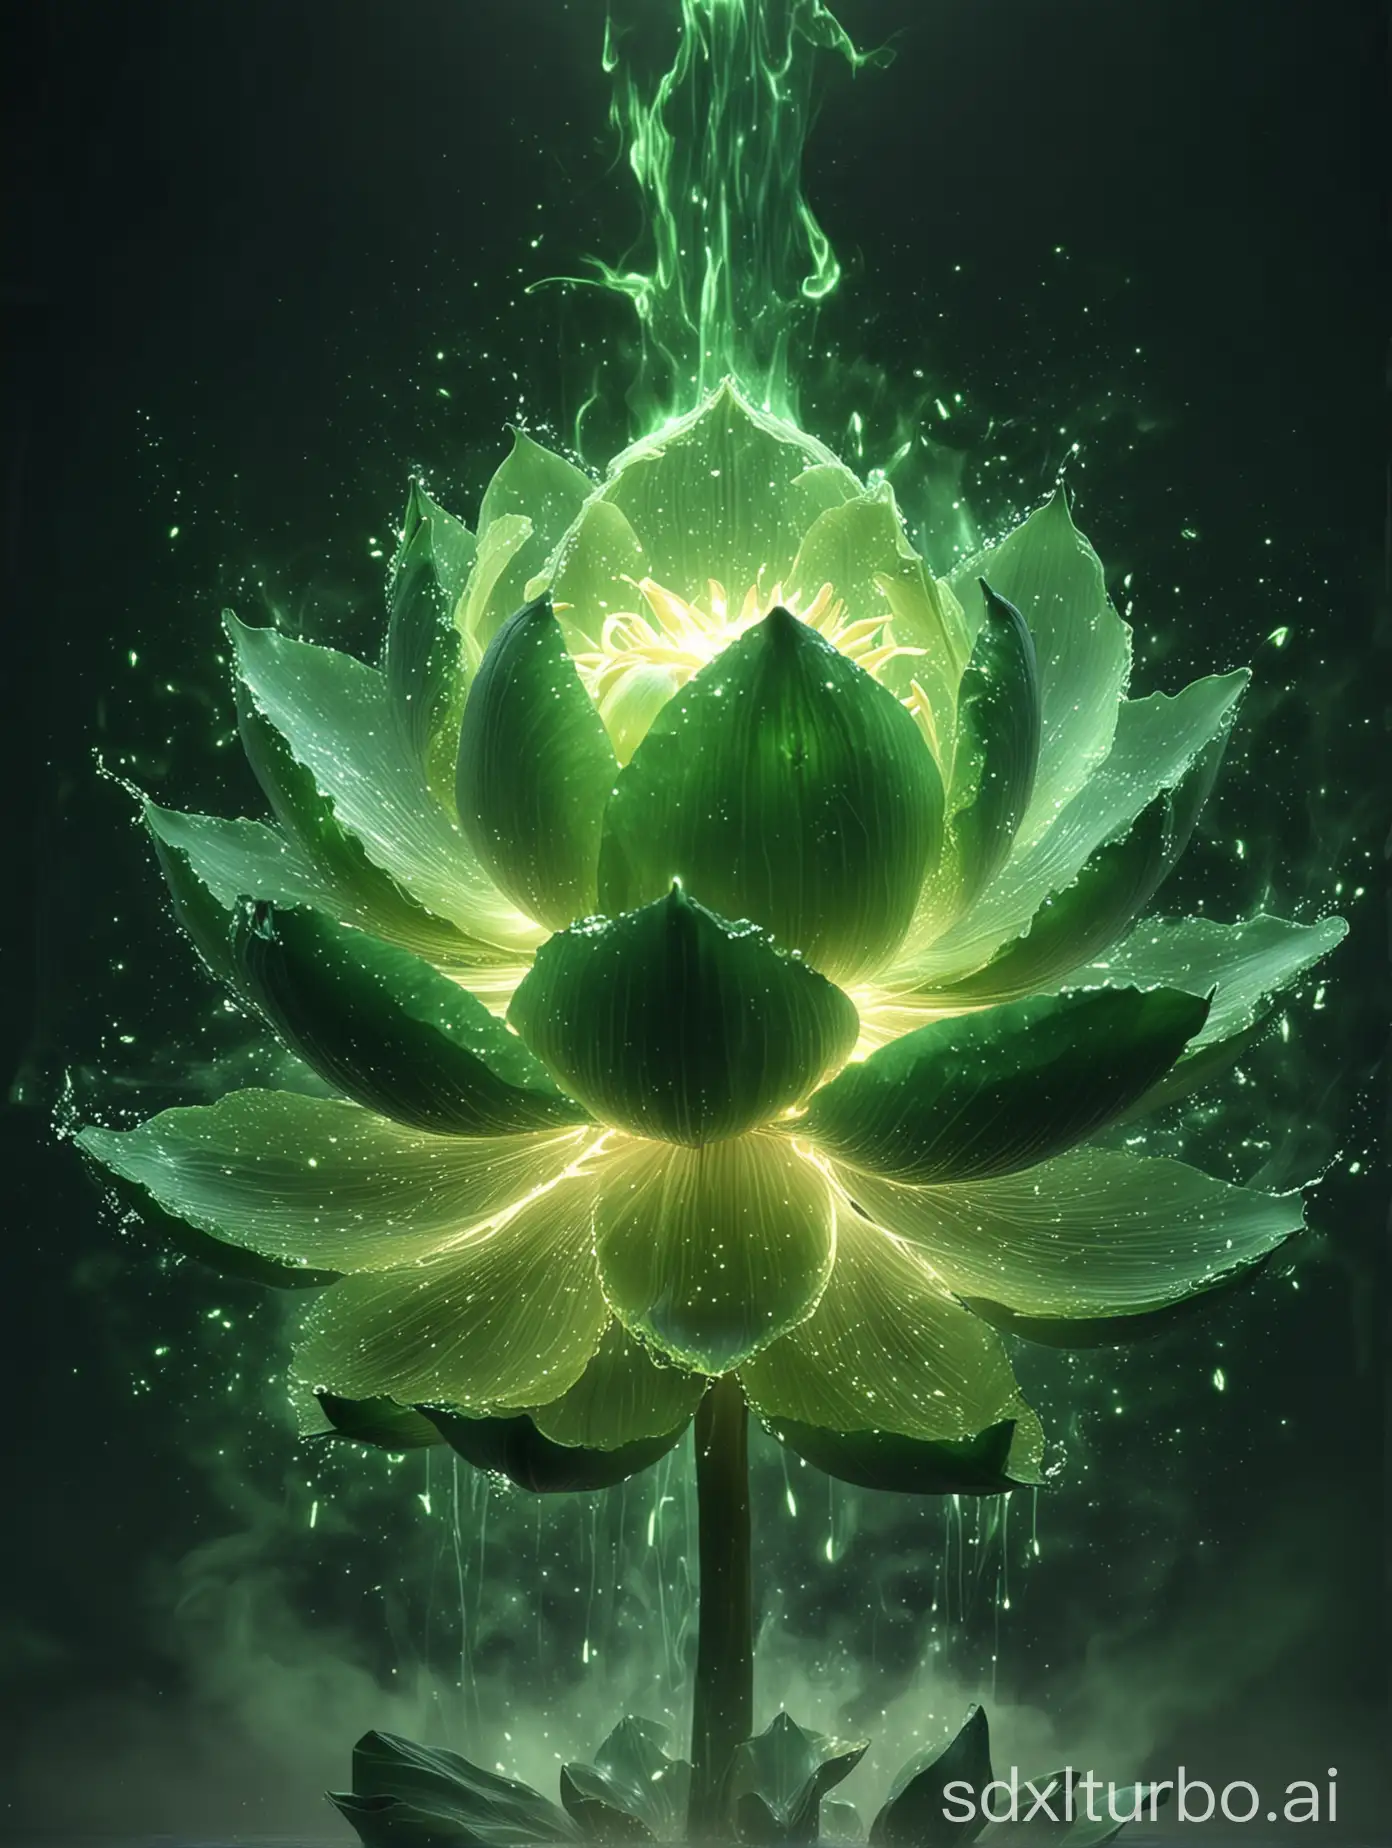 8K-UltraHD-Lotus-Flower-Burning-with-Ethereal-Green-Fire